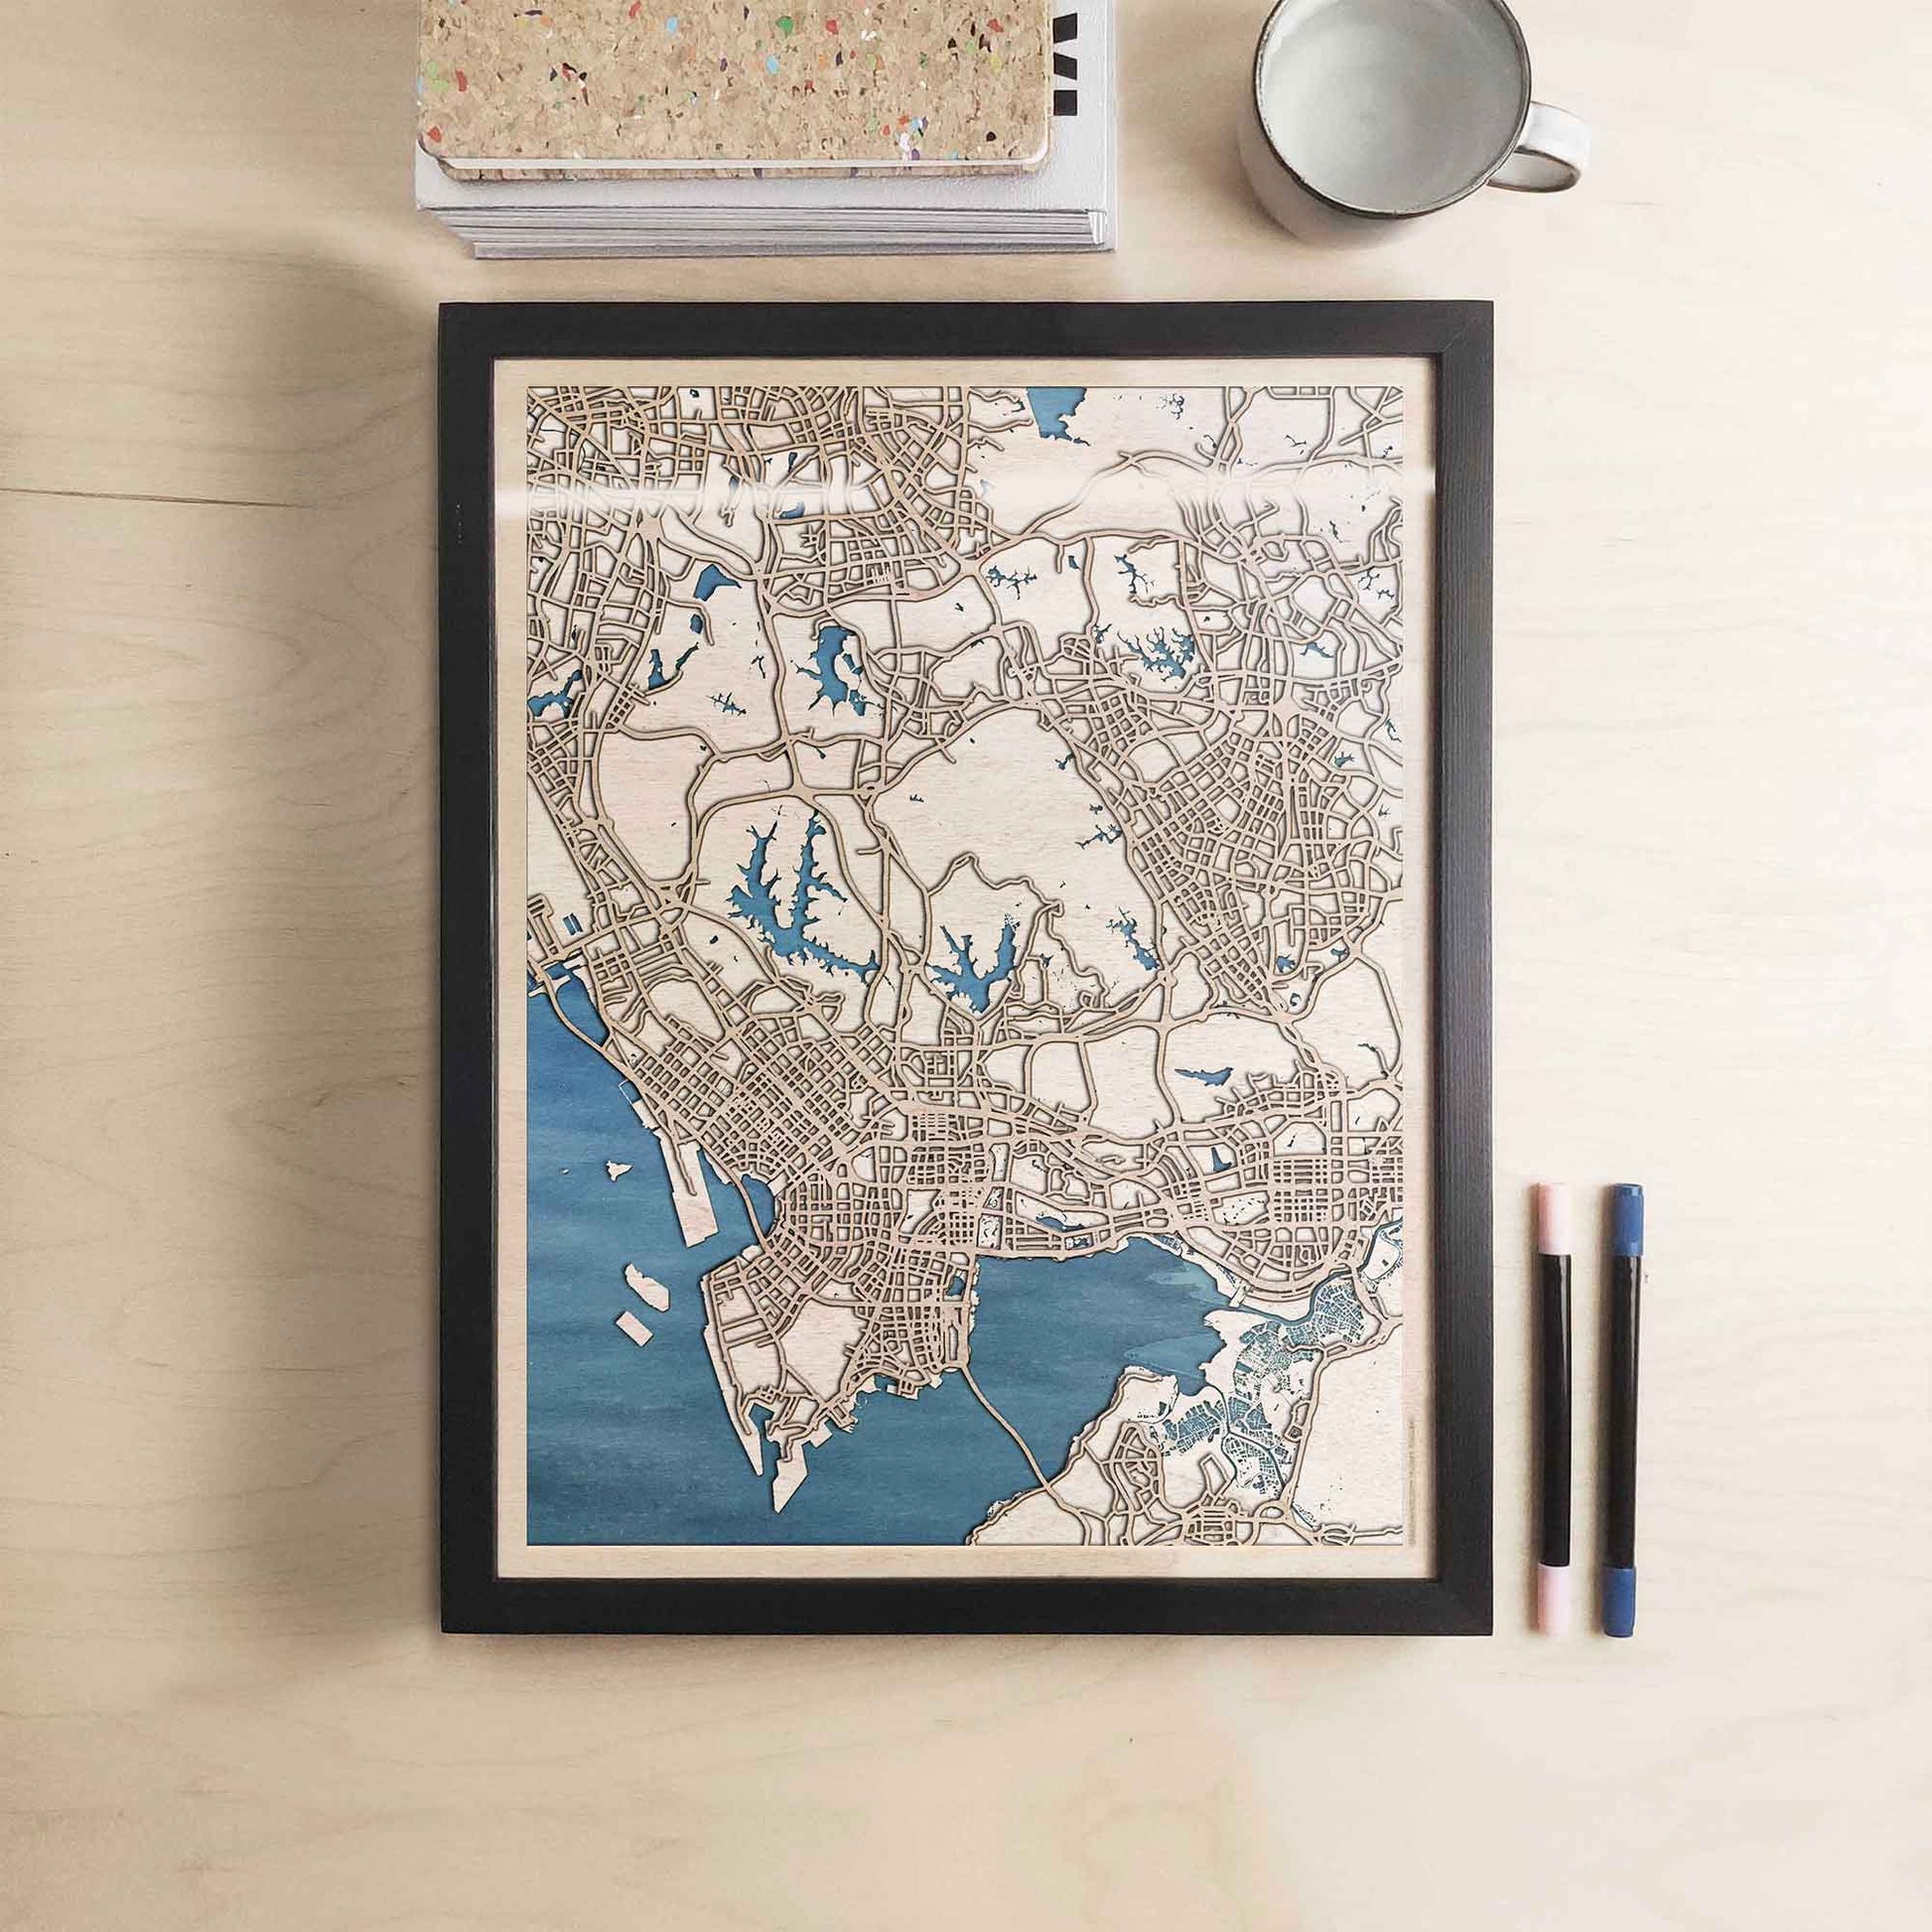 Shenzhen Wooden Map by CityWood - Custom Wood Map Art - Unique Laser Cut Engraved - Anniversary Gift